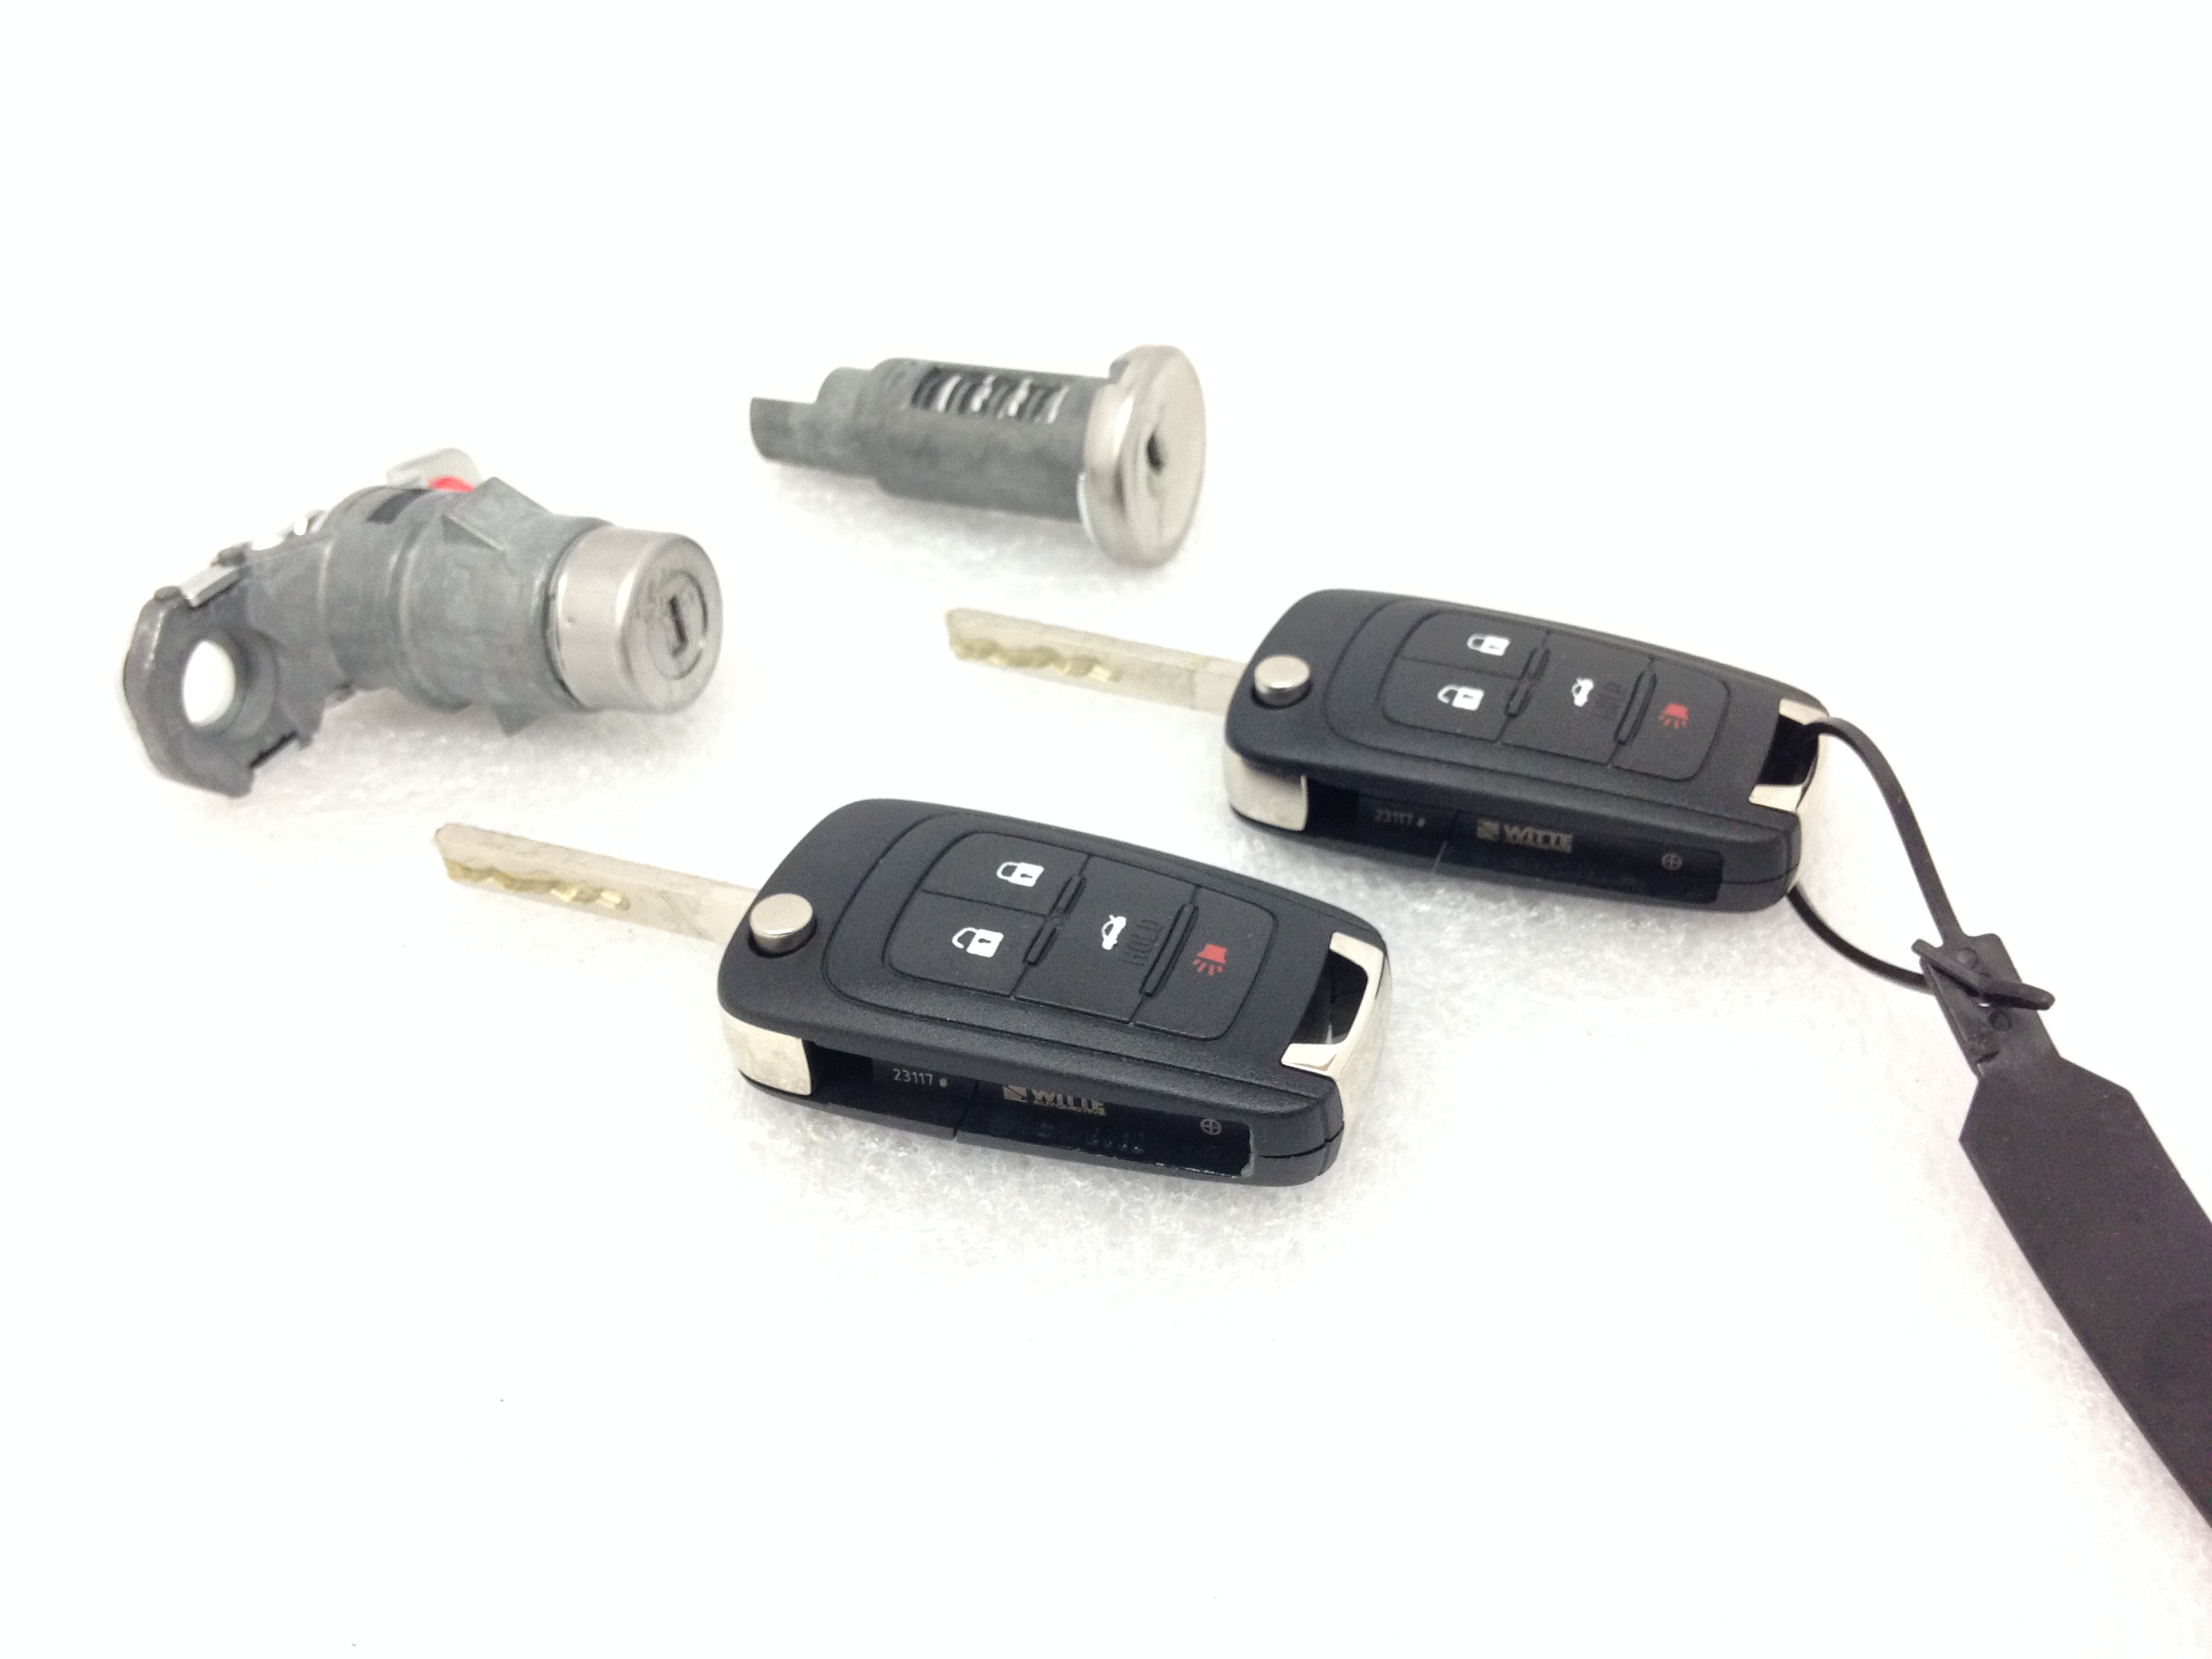 Chevy keyless entry door lock 4 button OEM remote fob kit